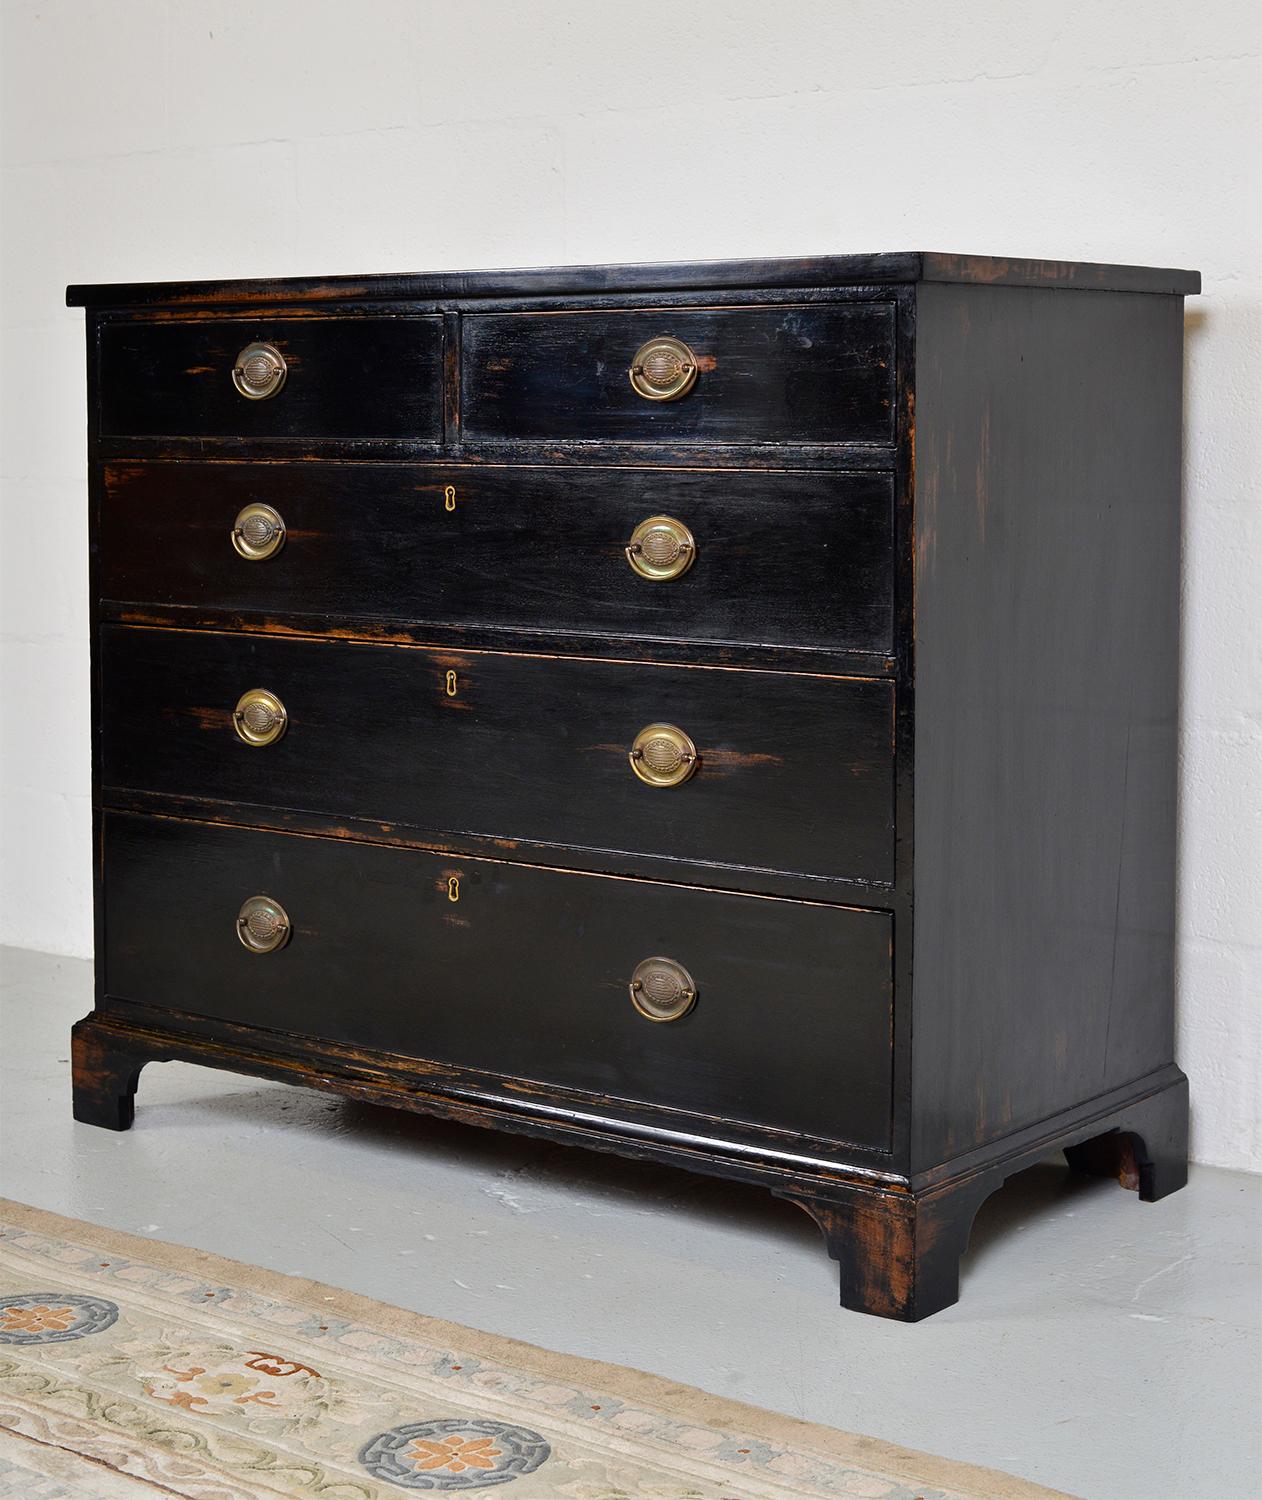 A late 19th century ebonized chest of drawers in the aesthetic taste. The chest sits on bracket feet with great proportions. The wear to the ebonized paint is fantastic and shows rich tones of the mahogany peeking through. Oak lined, dovetail